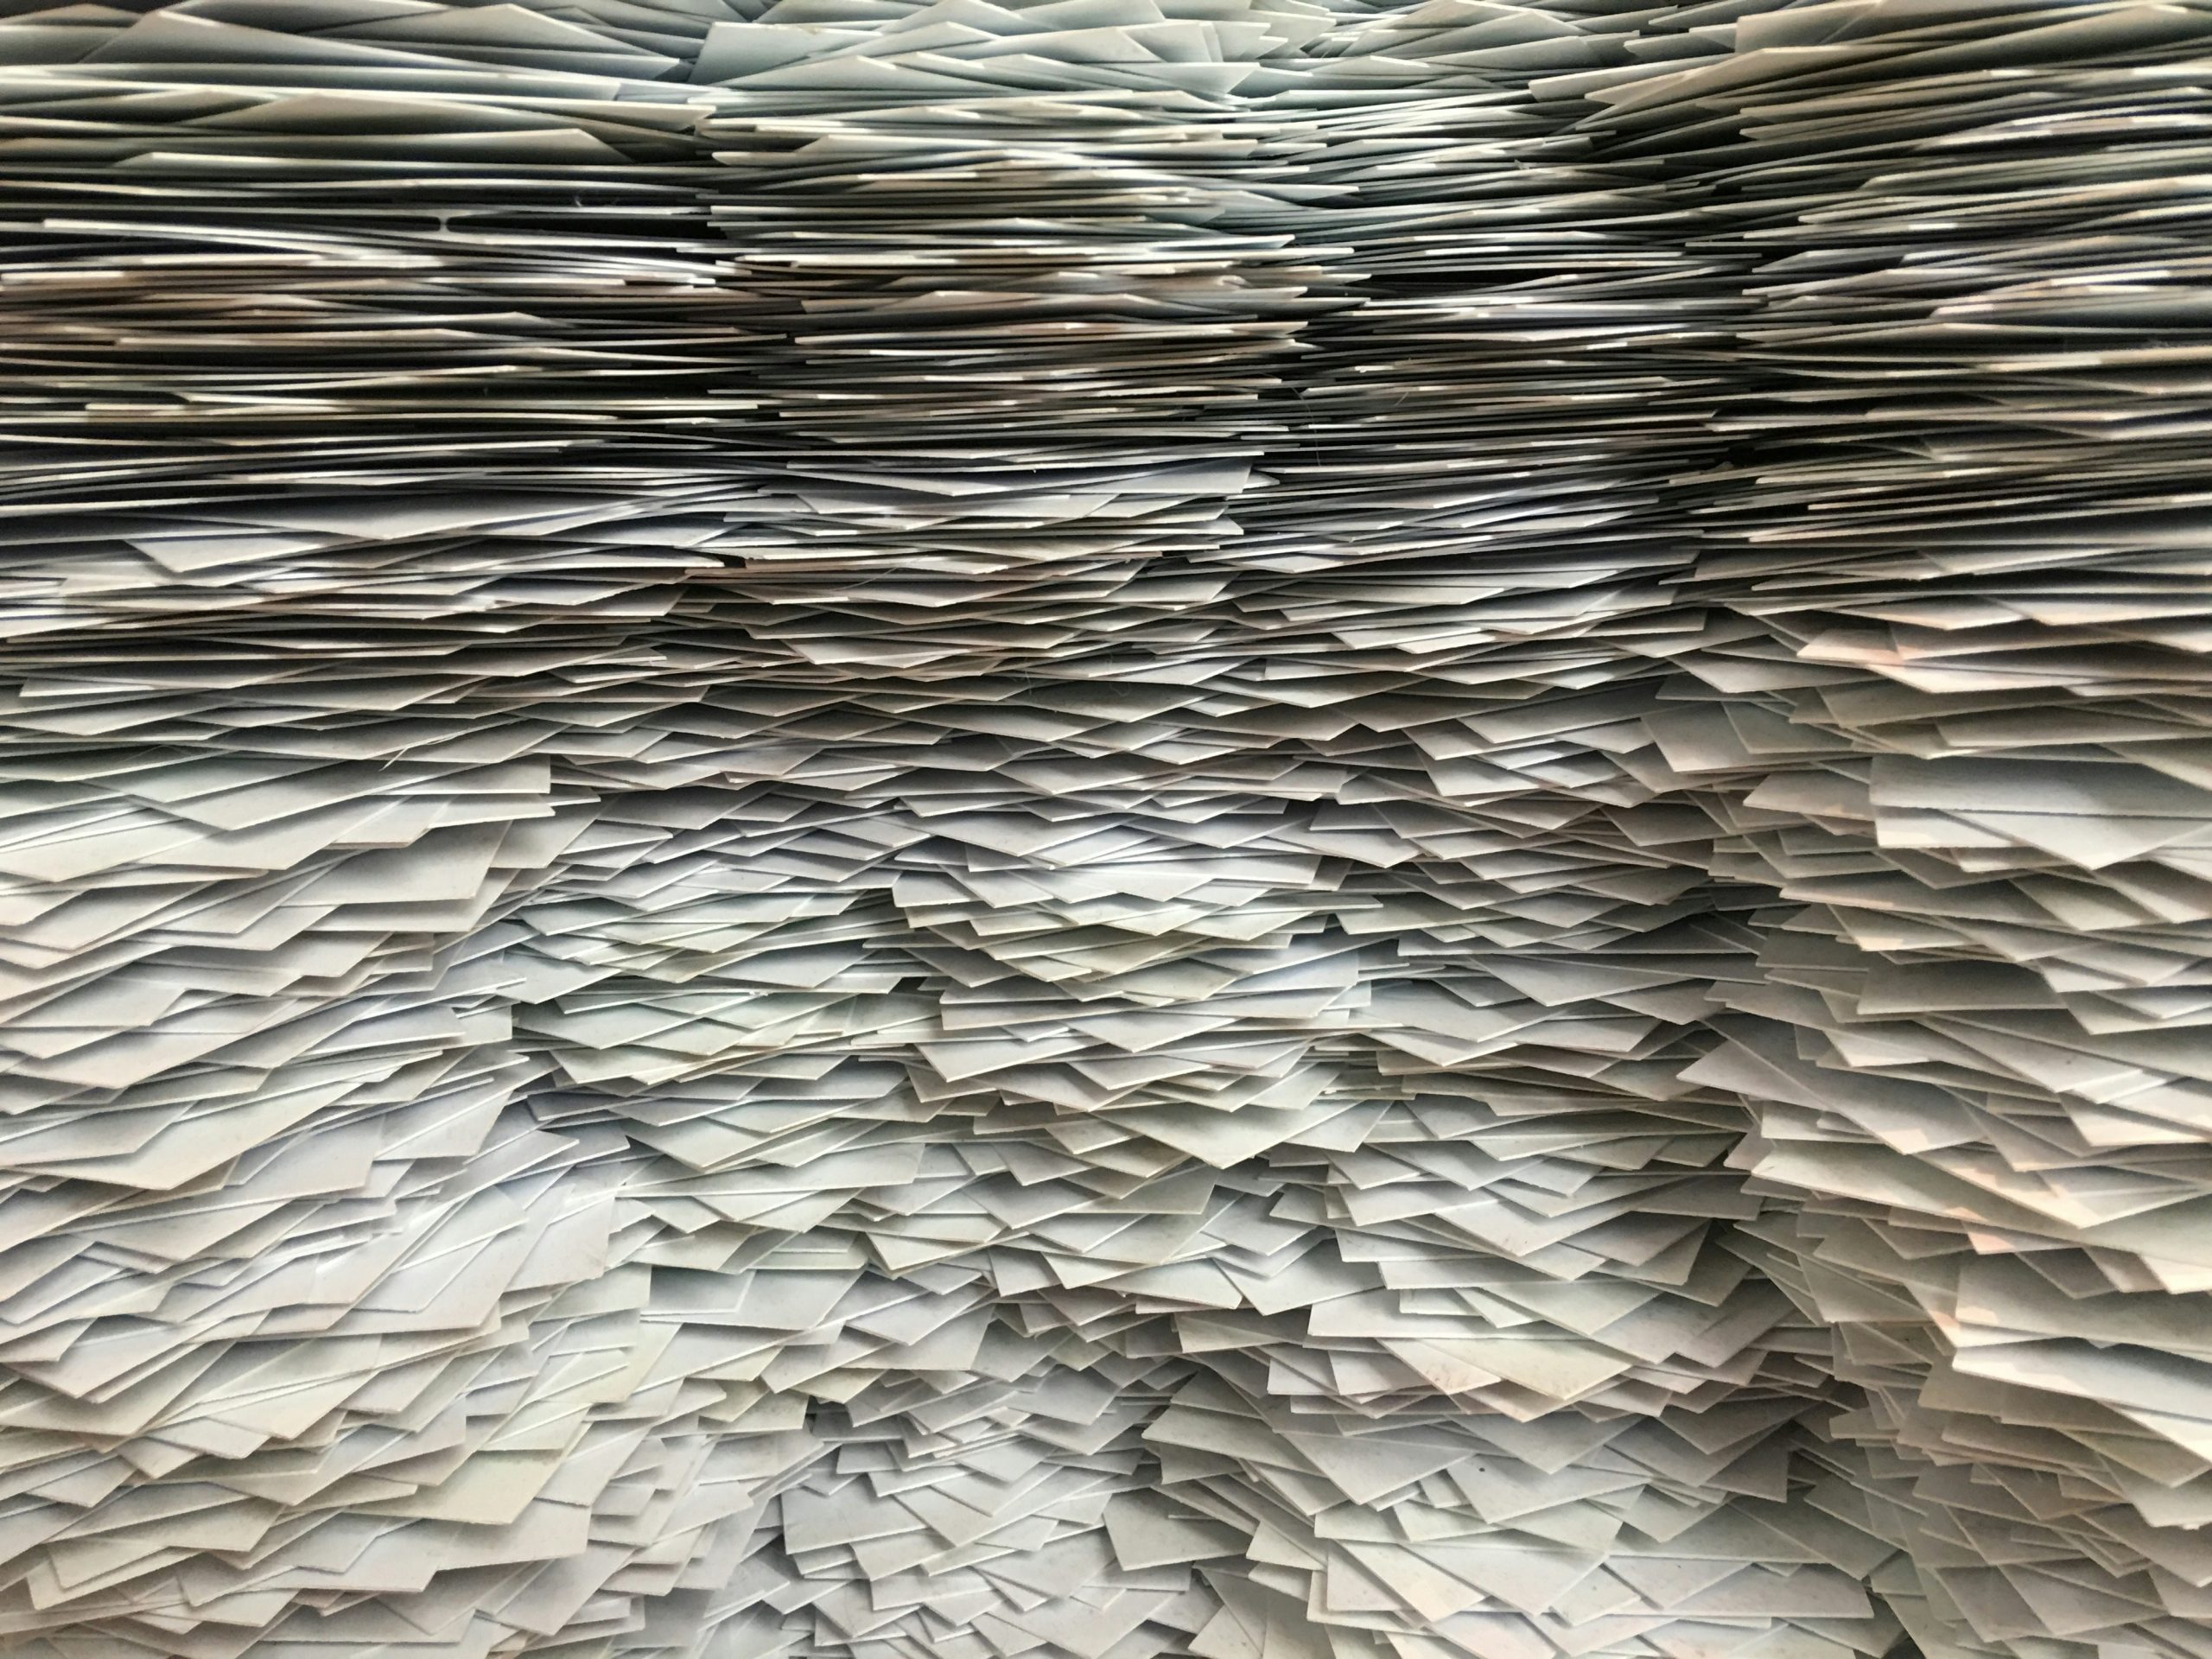 tonnes of envelopes balanced in stacks that interlace from the head of the image to the foot